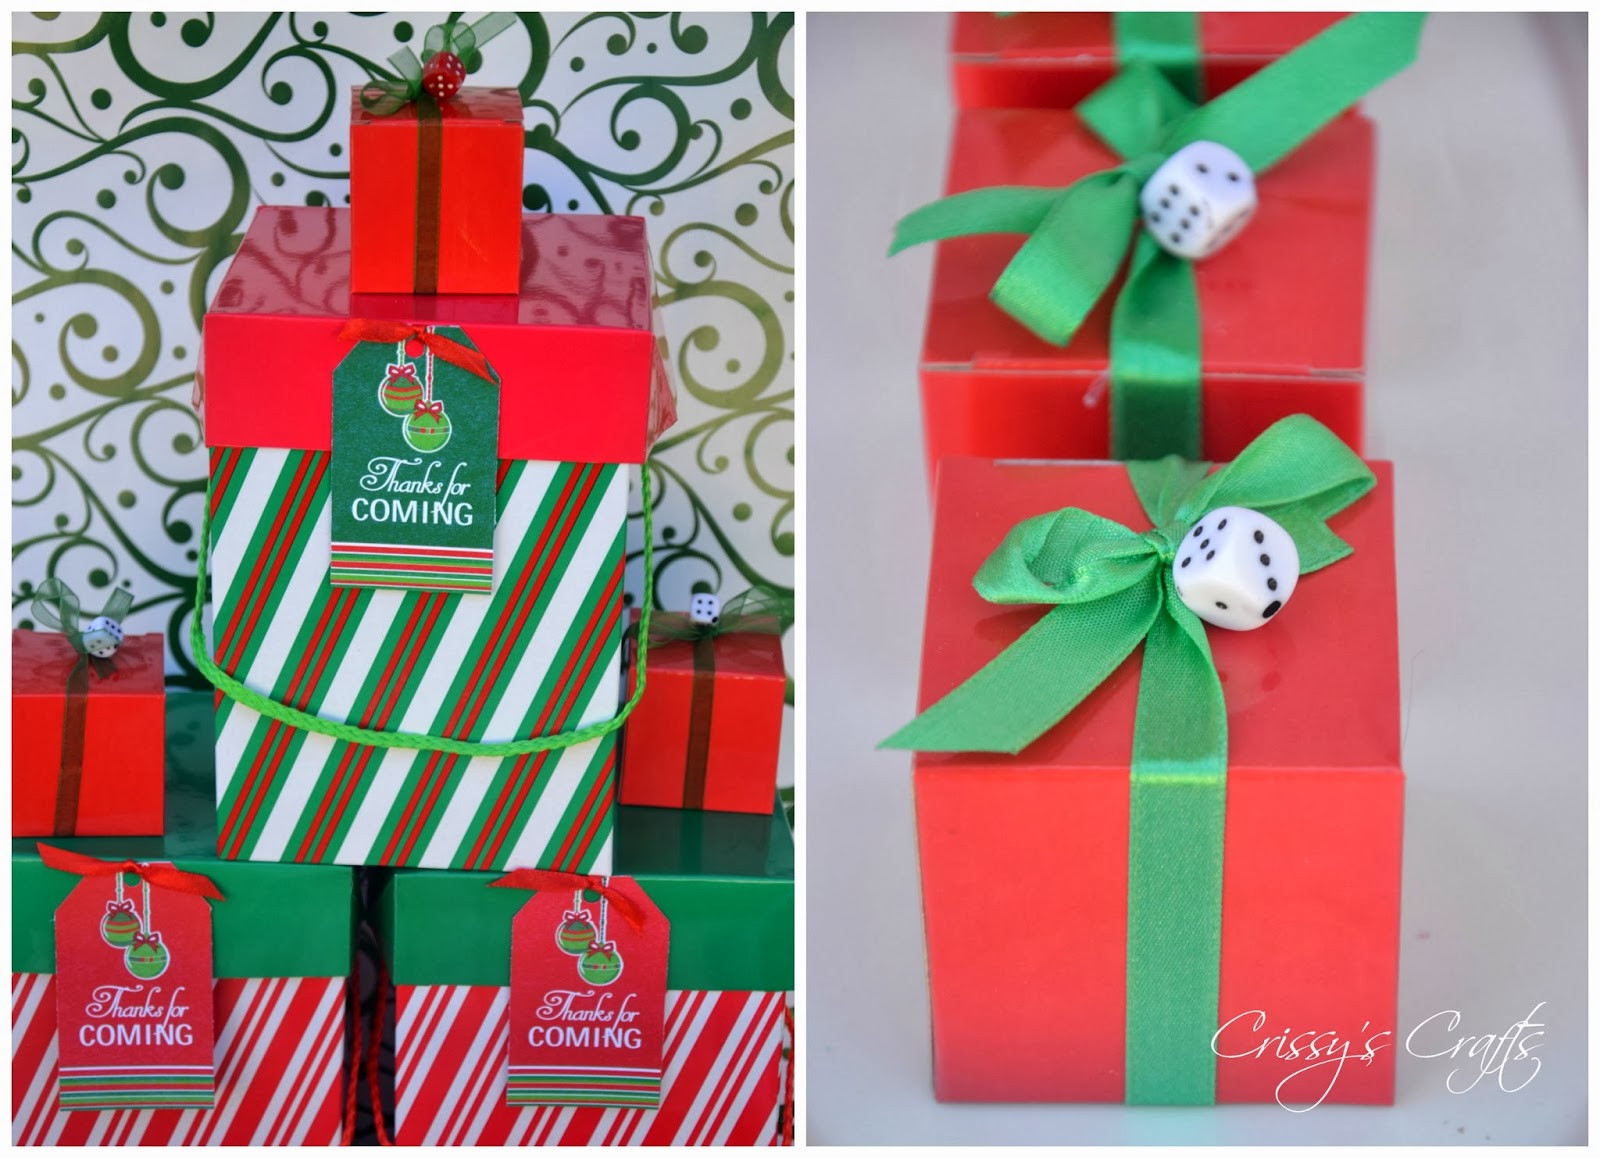 Bunco Christmas Party Ideas
 Crissy s Crafts Mother Daughter Holiday Bunco